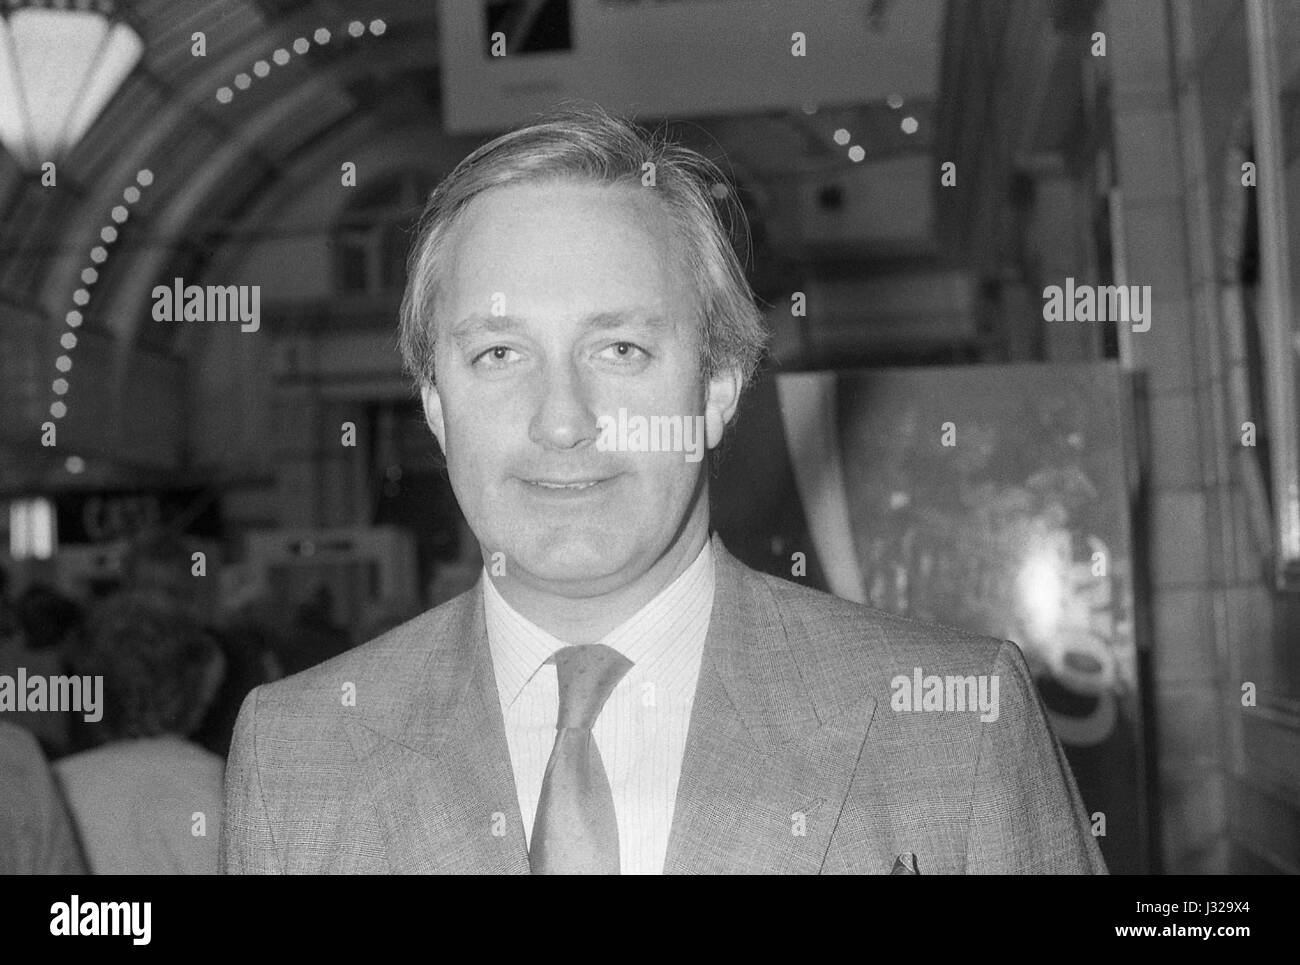 Neil Hamilton, Conservative party Member of Parliament for Tatton, attends the party conference in Blackpool, England on October 10, 1989. Stock Photo